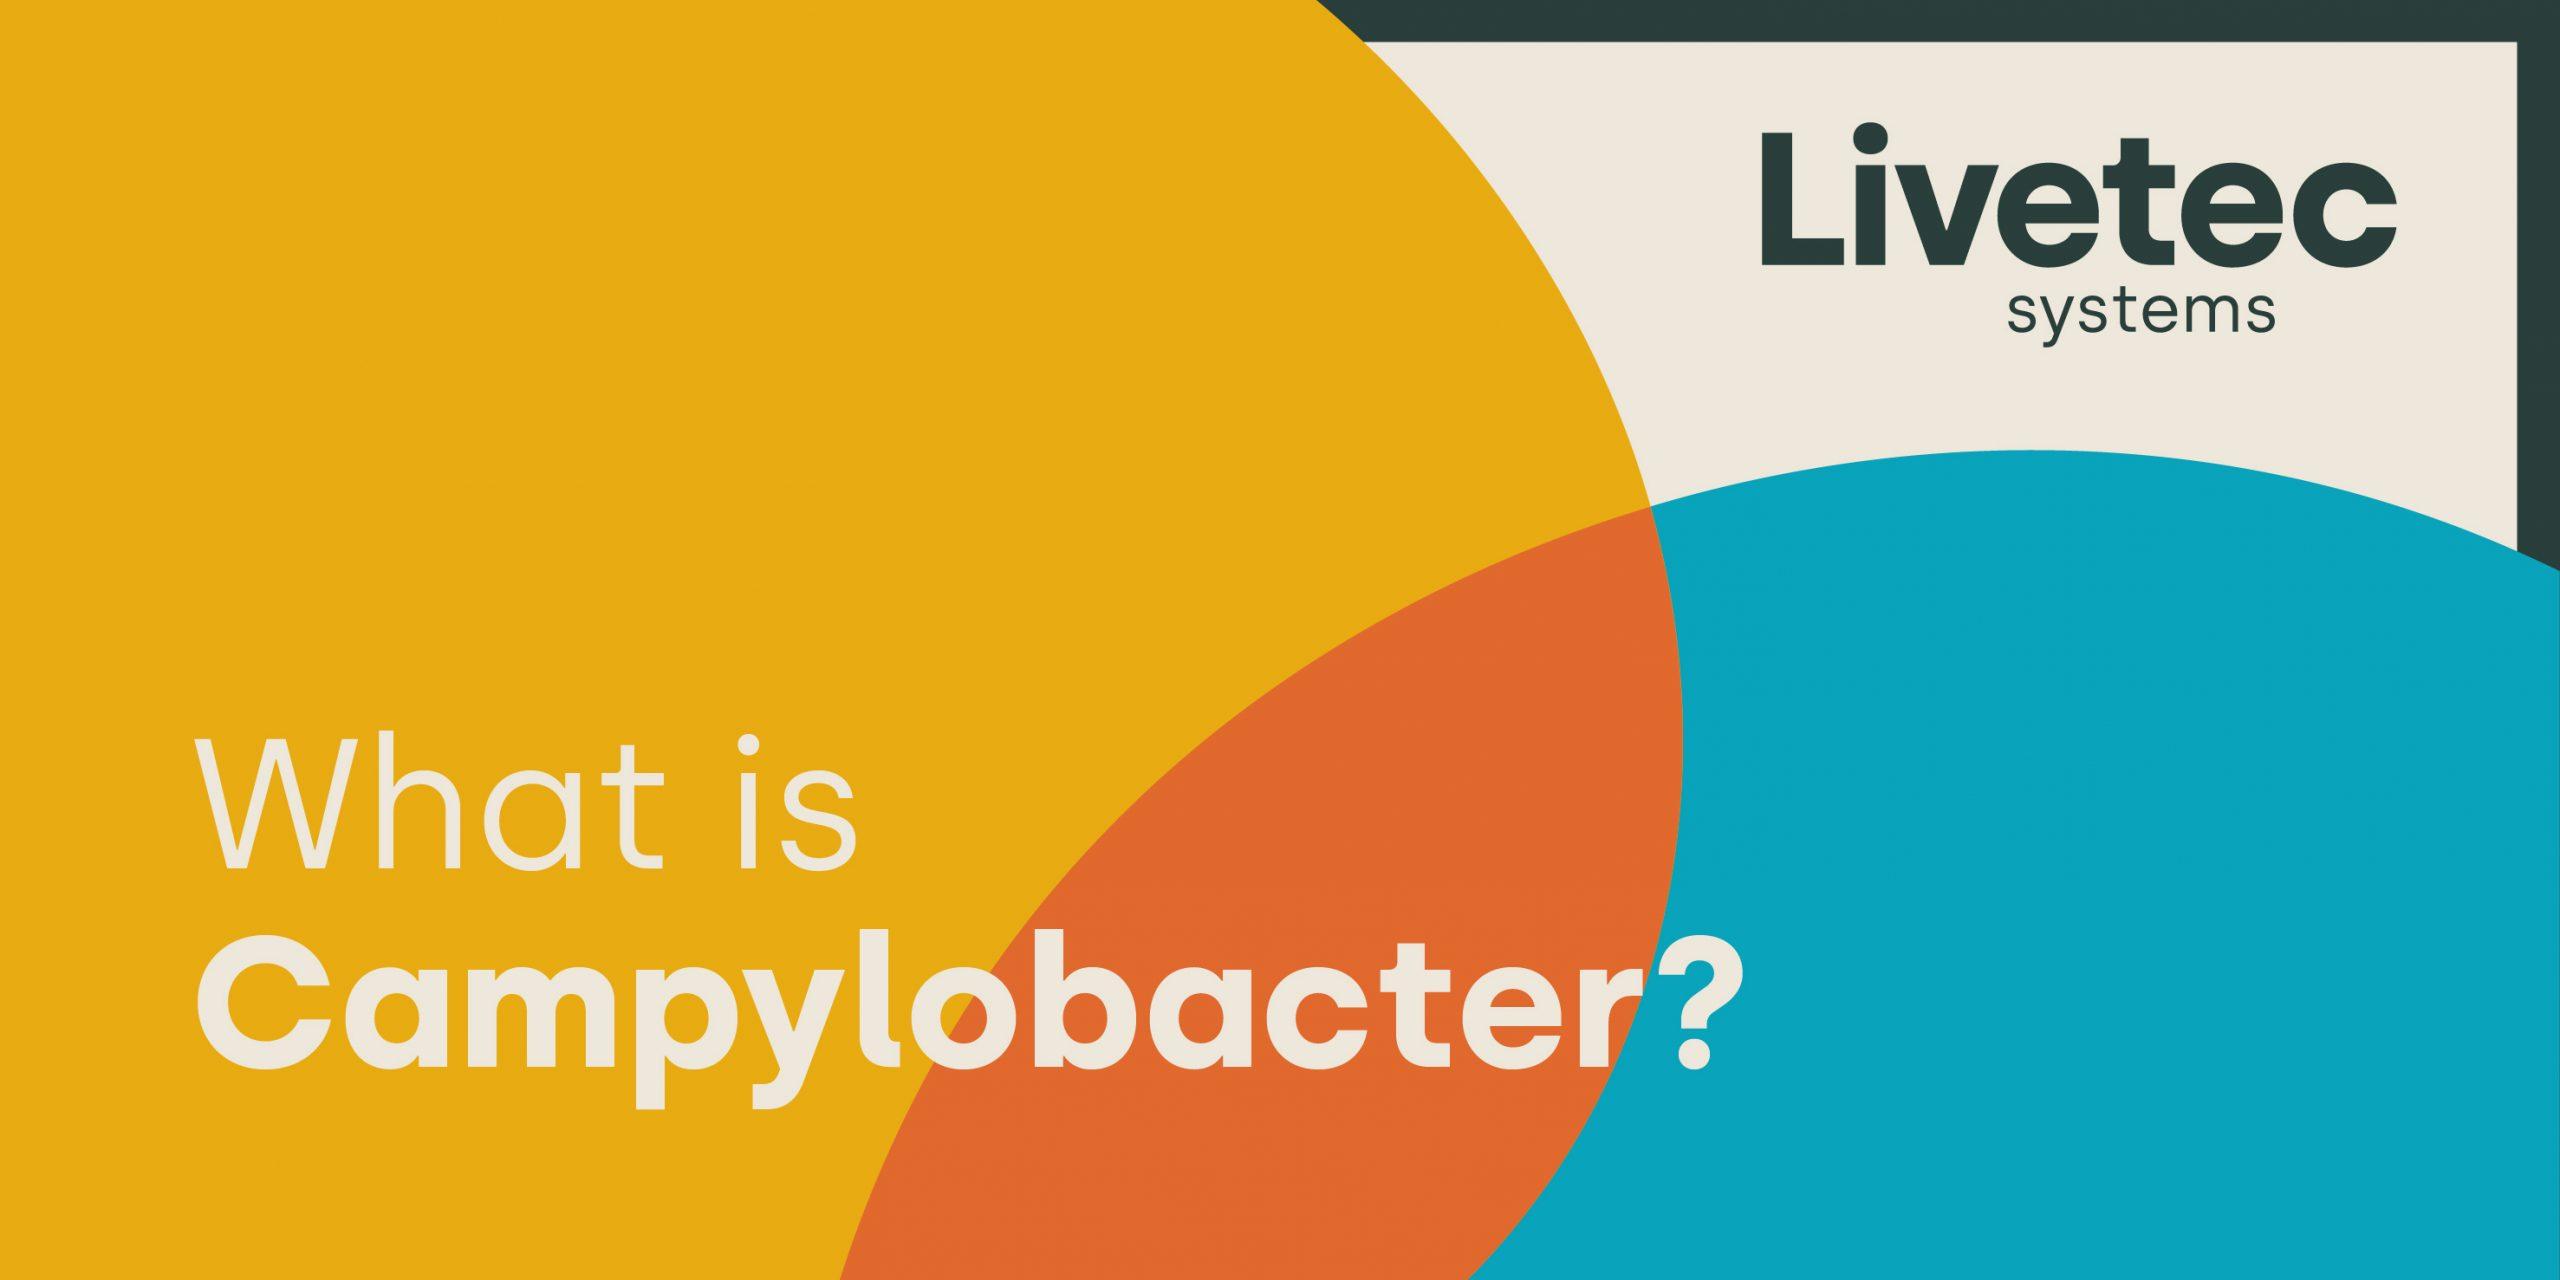 What is campylobacter?